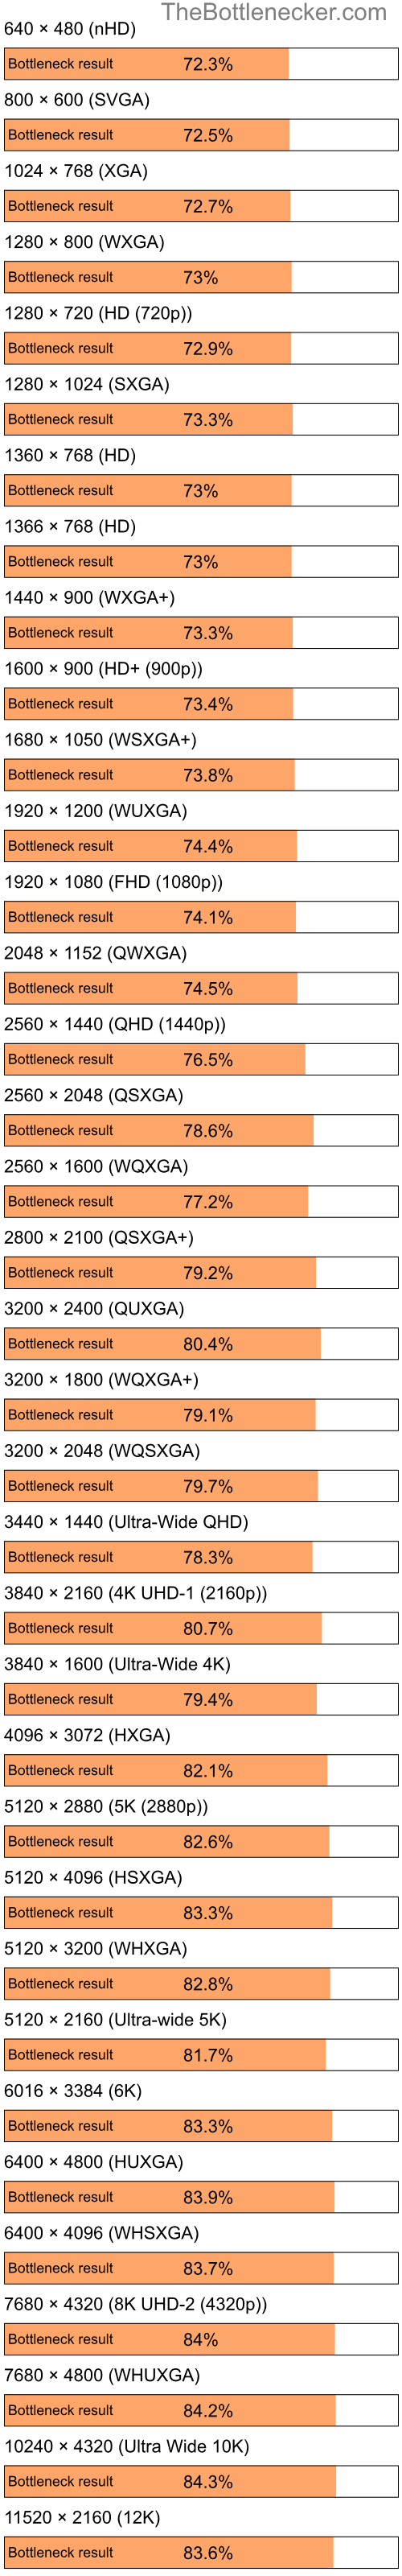 Bottleneck results by resolution for Intel Pentium 4 and NVIDIA GeForce 7100 in Processor Intense Tasks